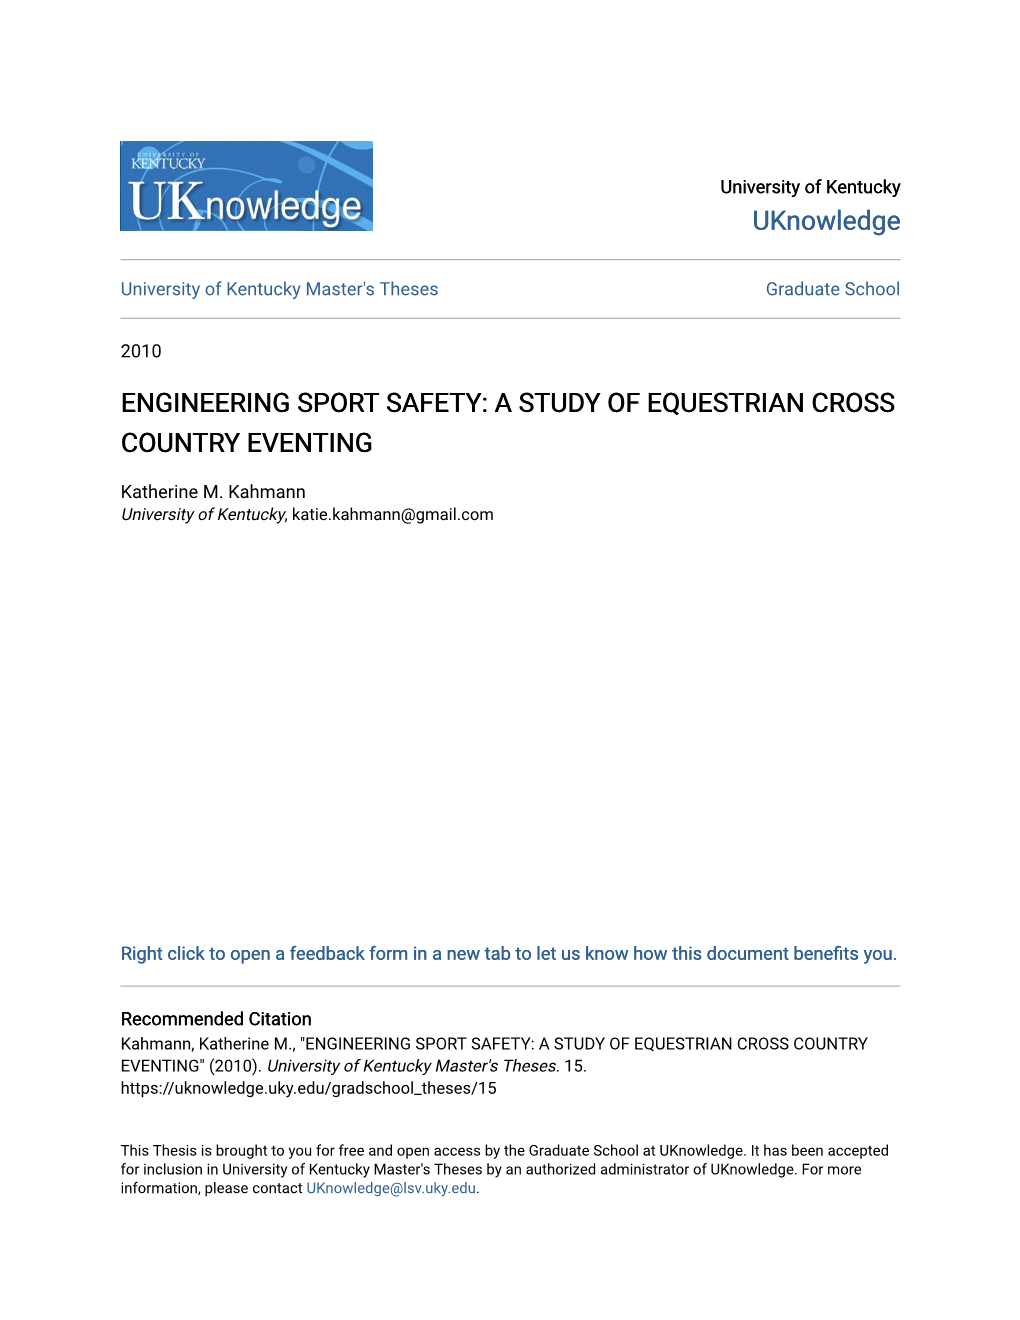 A Study of Equestrian Cross Country Eventing